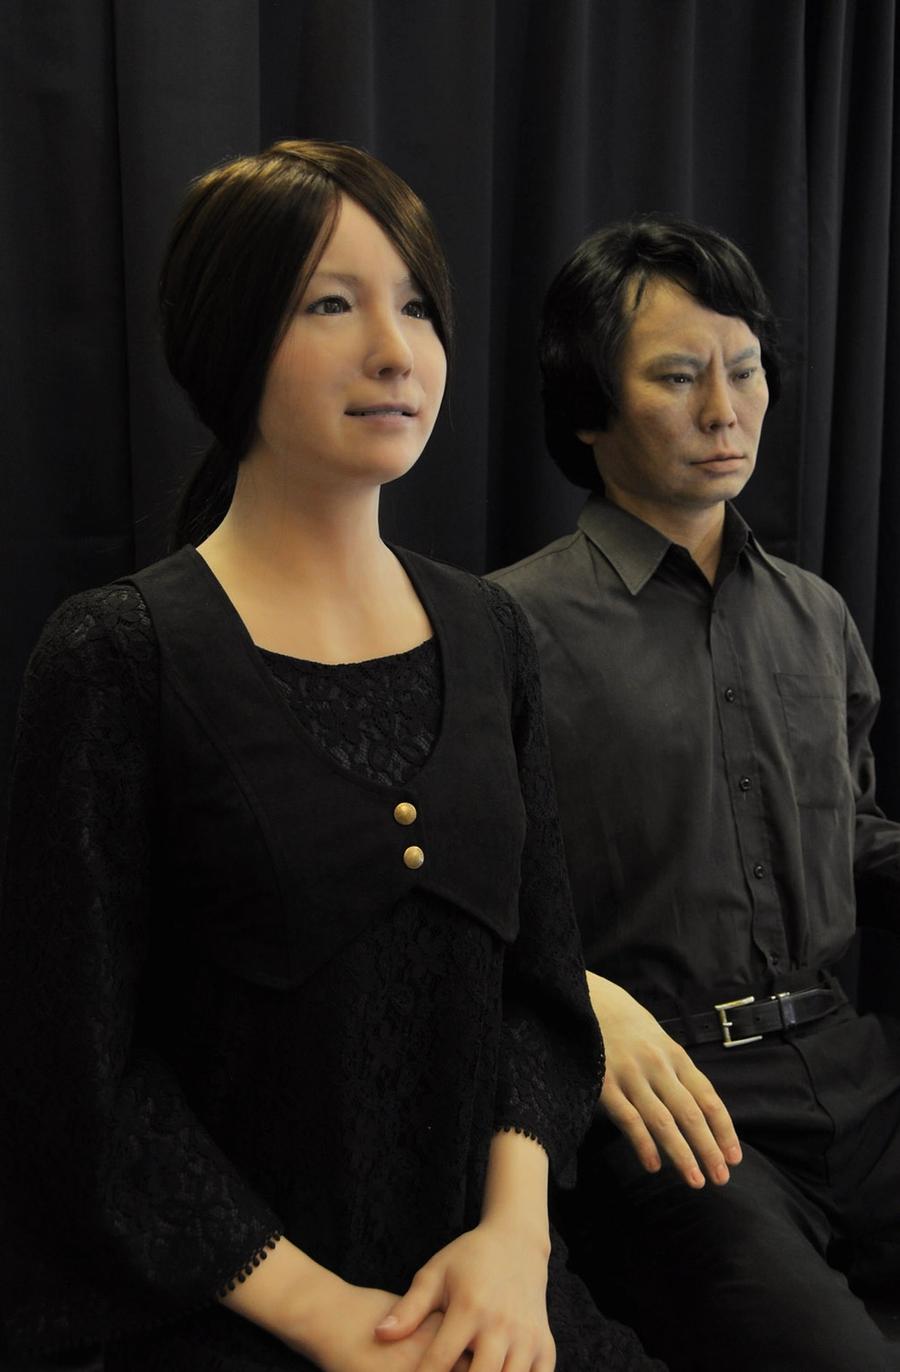 A very realistic looking female and male android sit together.